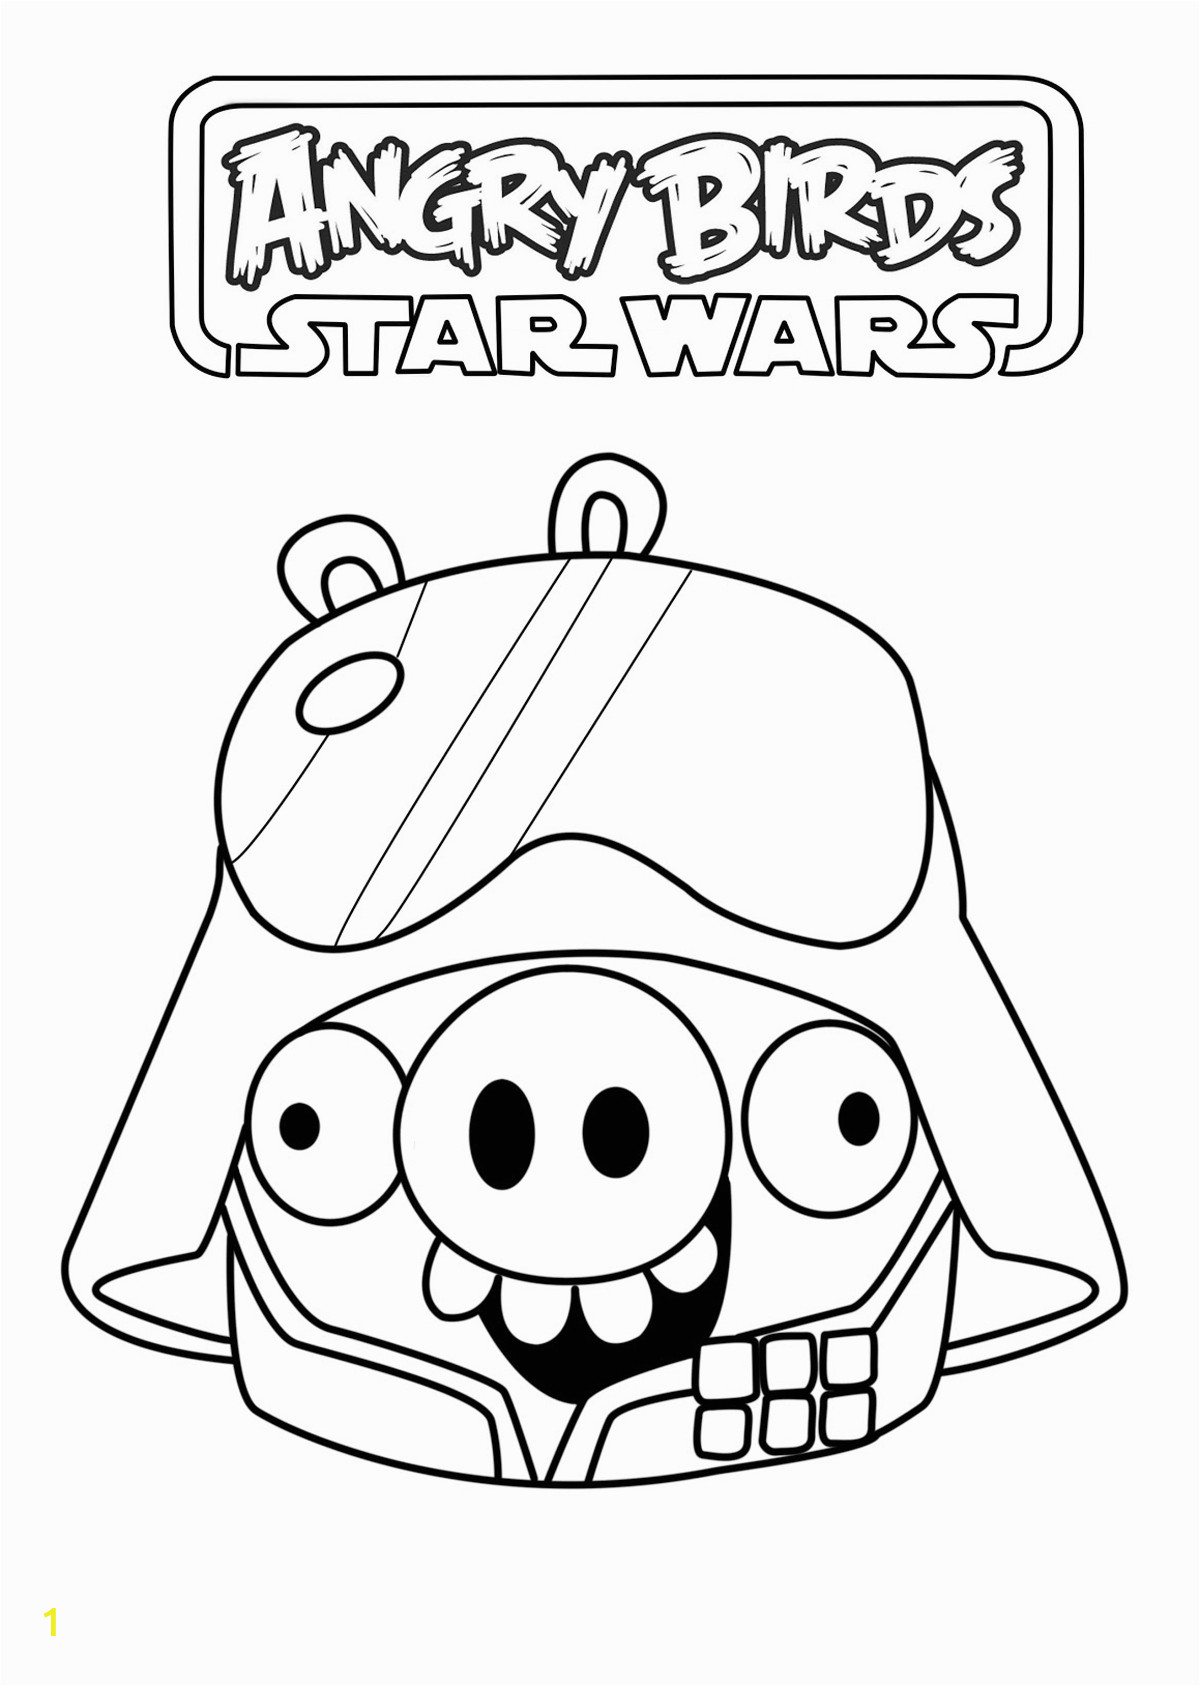 image=angry birds star wars Coloring for kids angry birds star wars 1